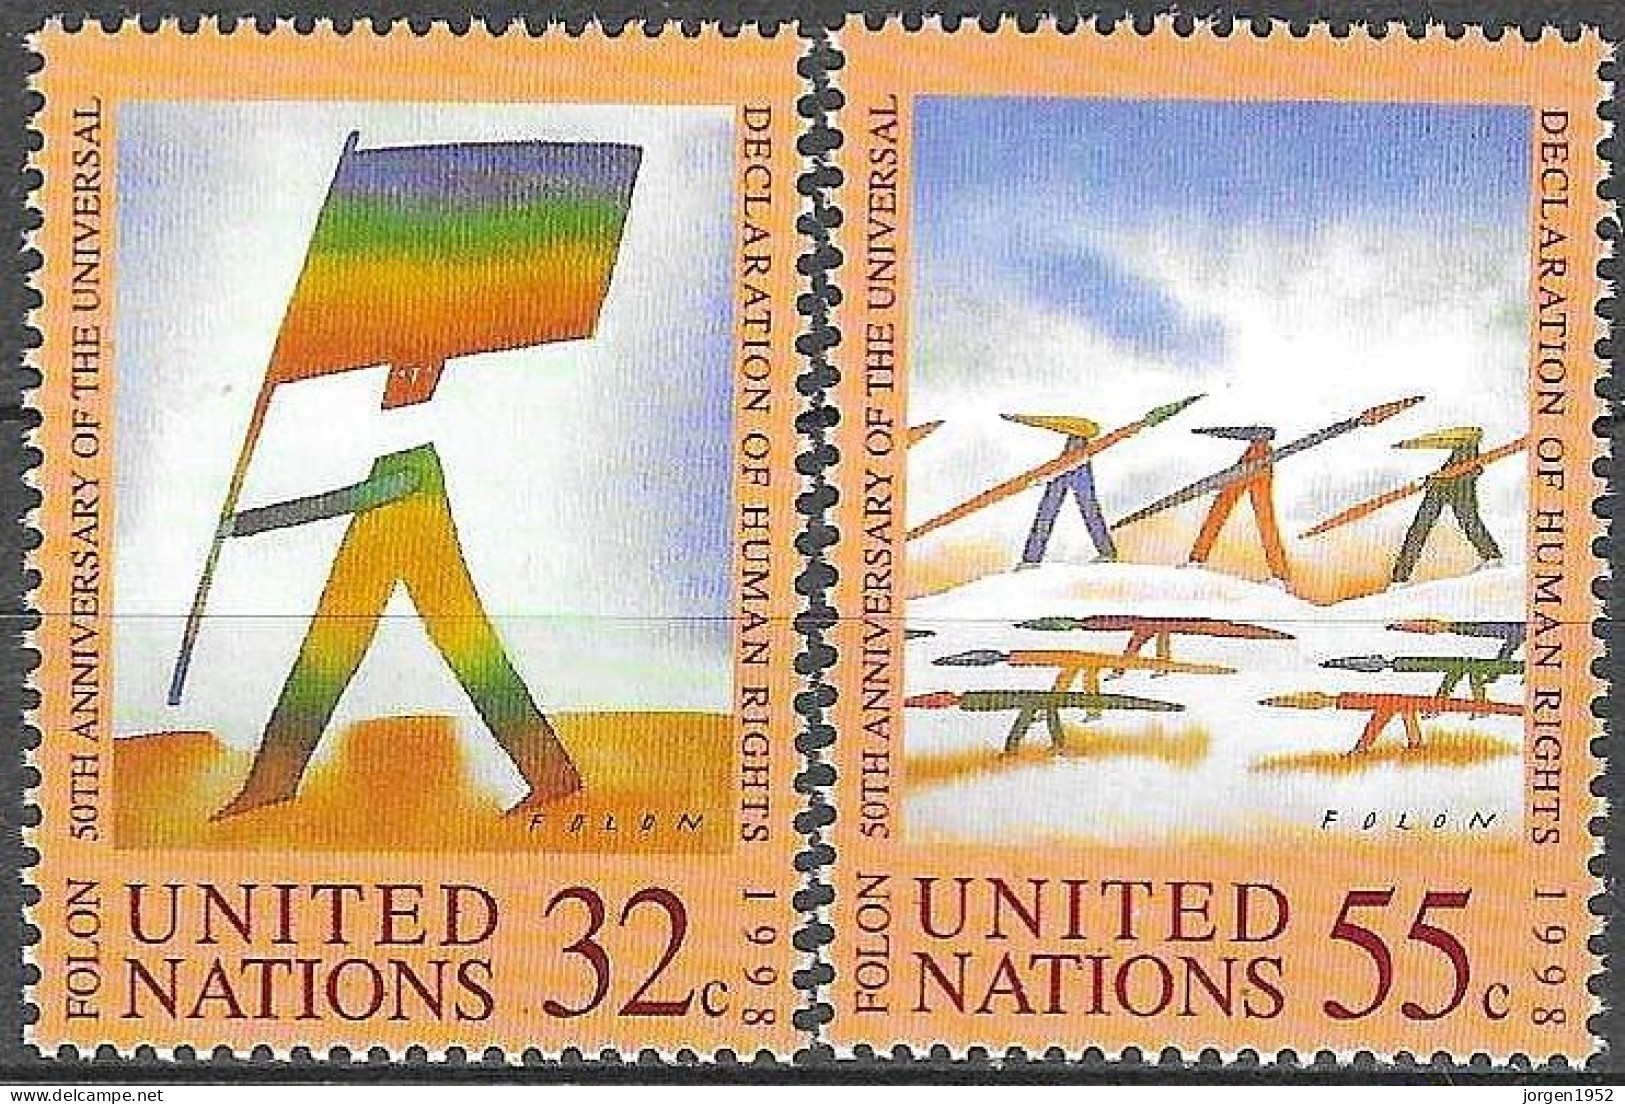 UNITED NATIONS # NEW YORK FROM 1998 STAMPWORLD 787-88** - Nuovi